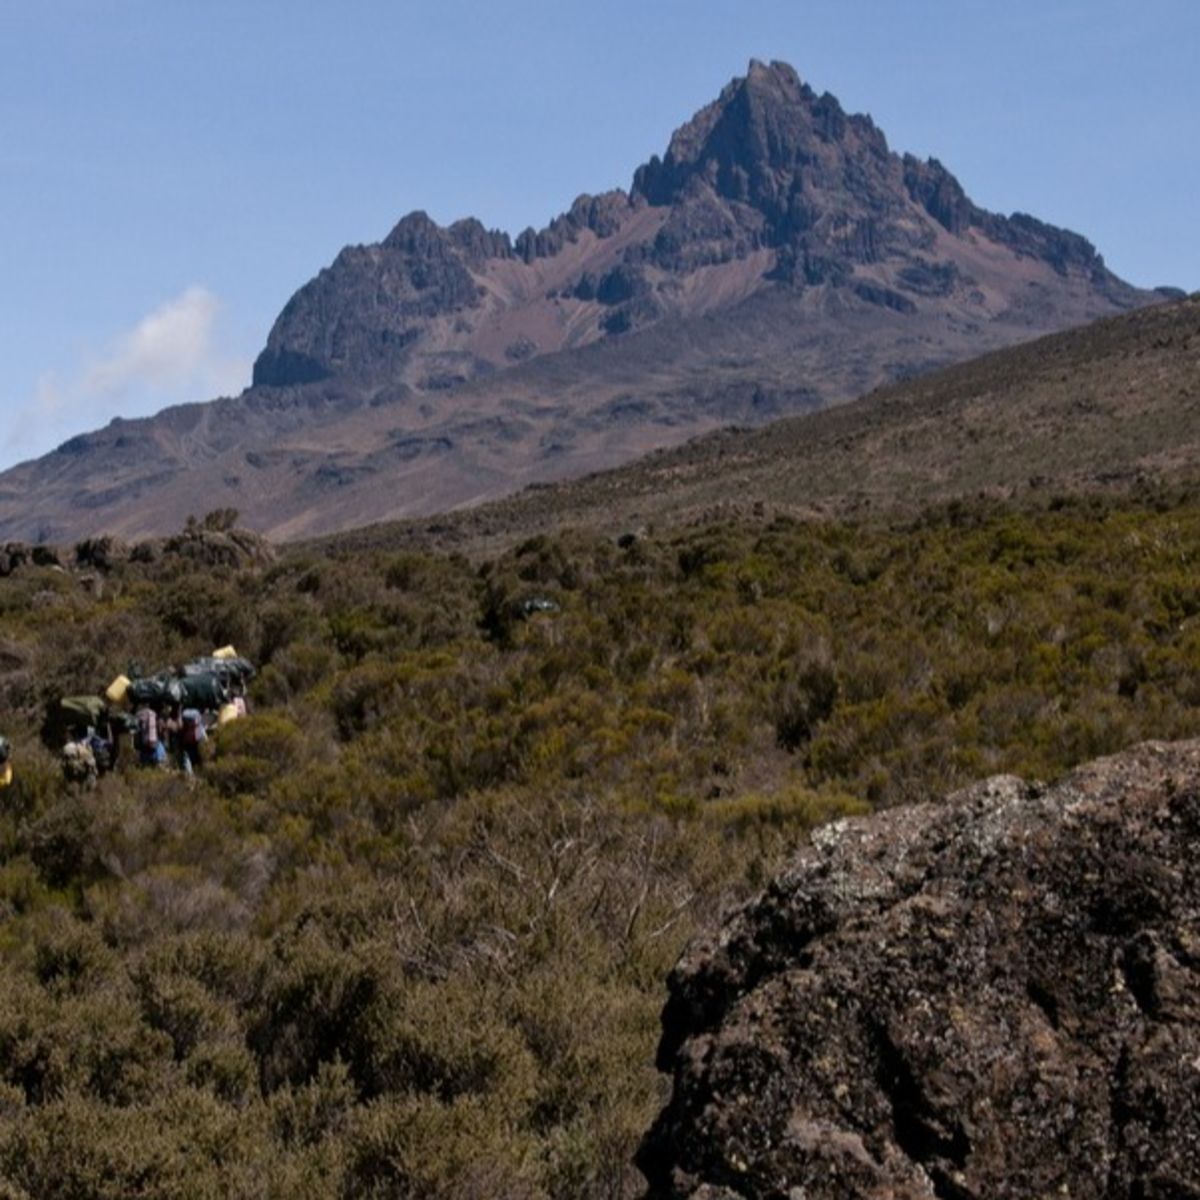 Ours. S. Porters in moorland zone on Rongai with Mawenzi in background, Kilimanjaro 